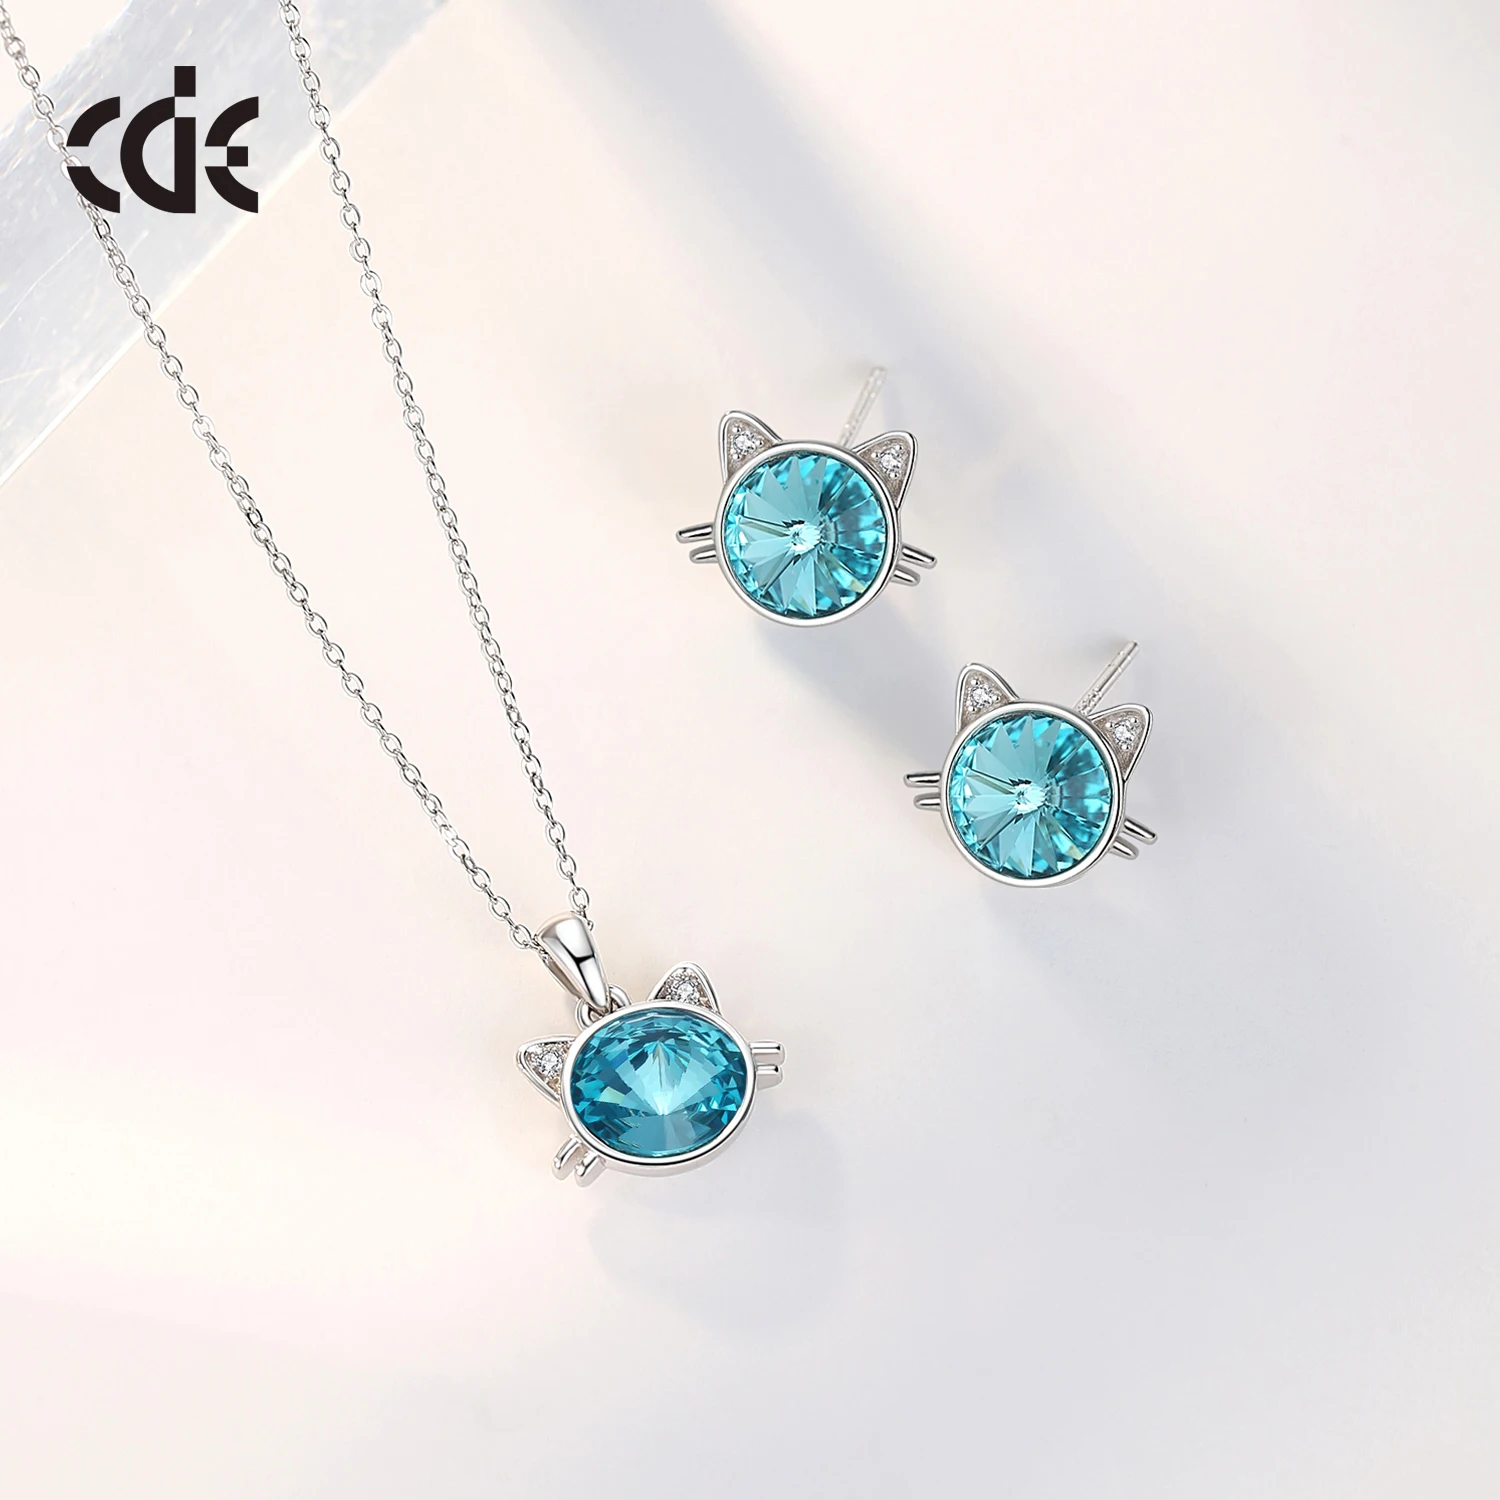 CDE YN1203 925 Silver Jewelry 925 Sterling Silver Animal Necklace Women Rhodium Plated Cat Pendant Colour Crystal Cute Necklace